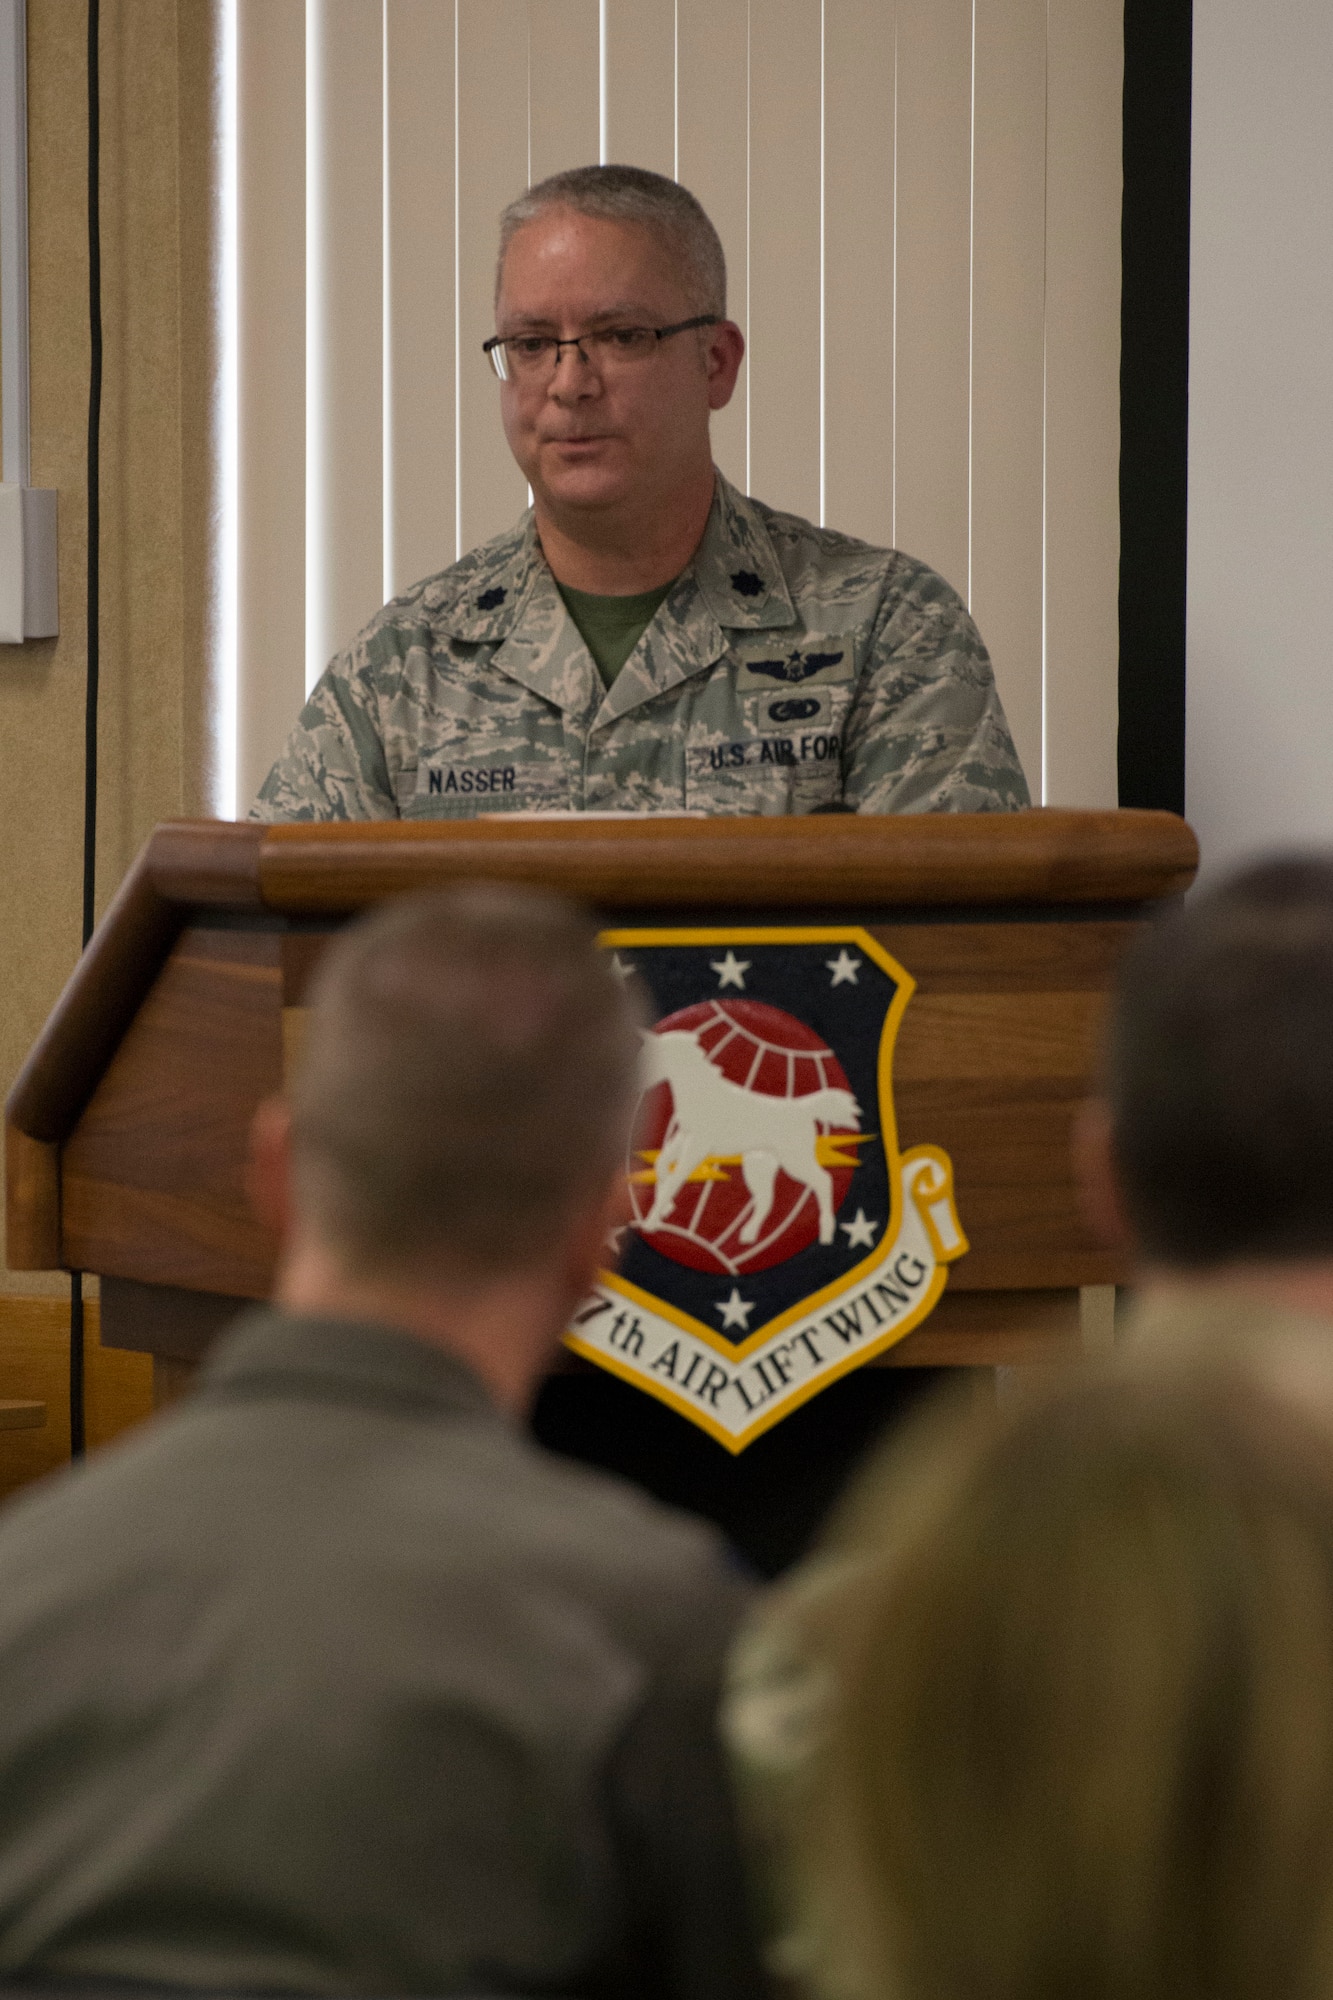 Lt. Col. Charles Nasser addresses the audience at his assumption of command ceremony, Feb. 1, 2020. Nasser steps into the 167th Mission Support Group commander role after serving as the deputy group commander.